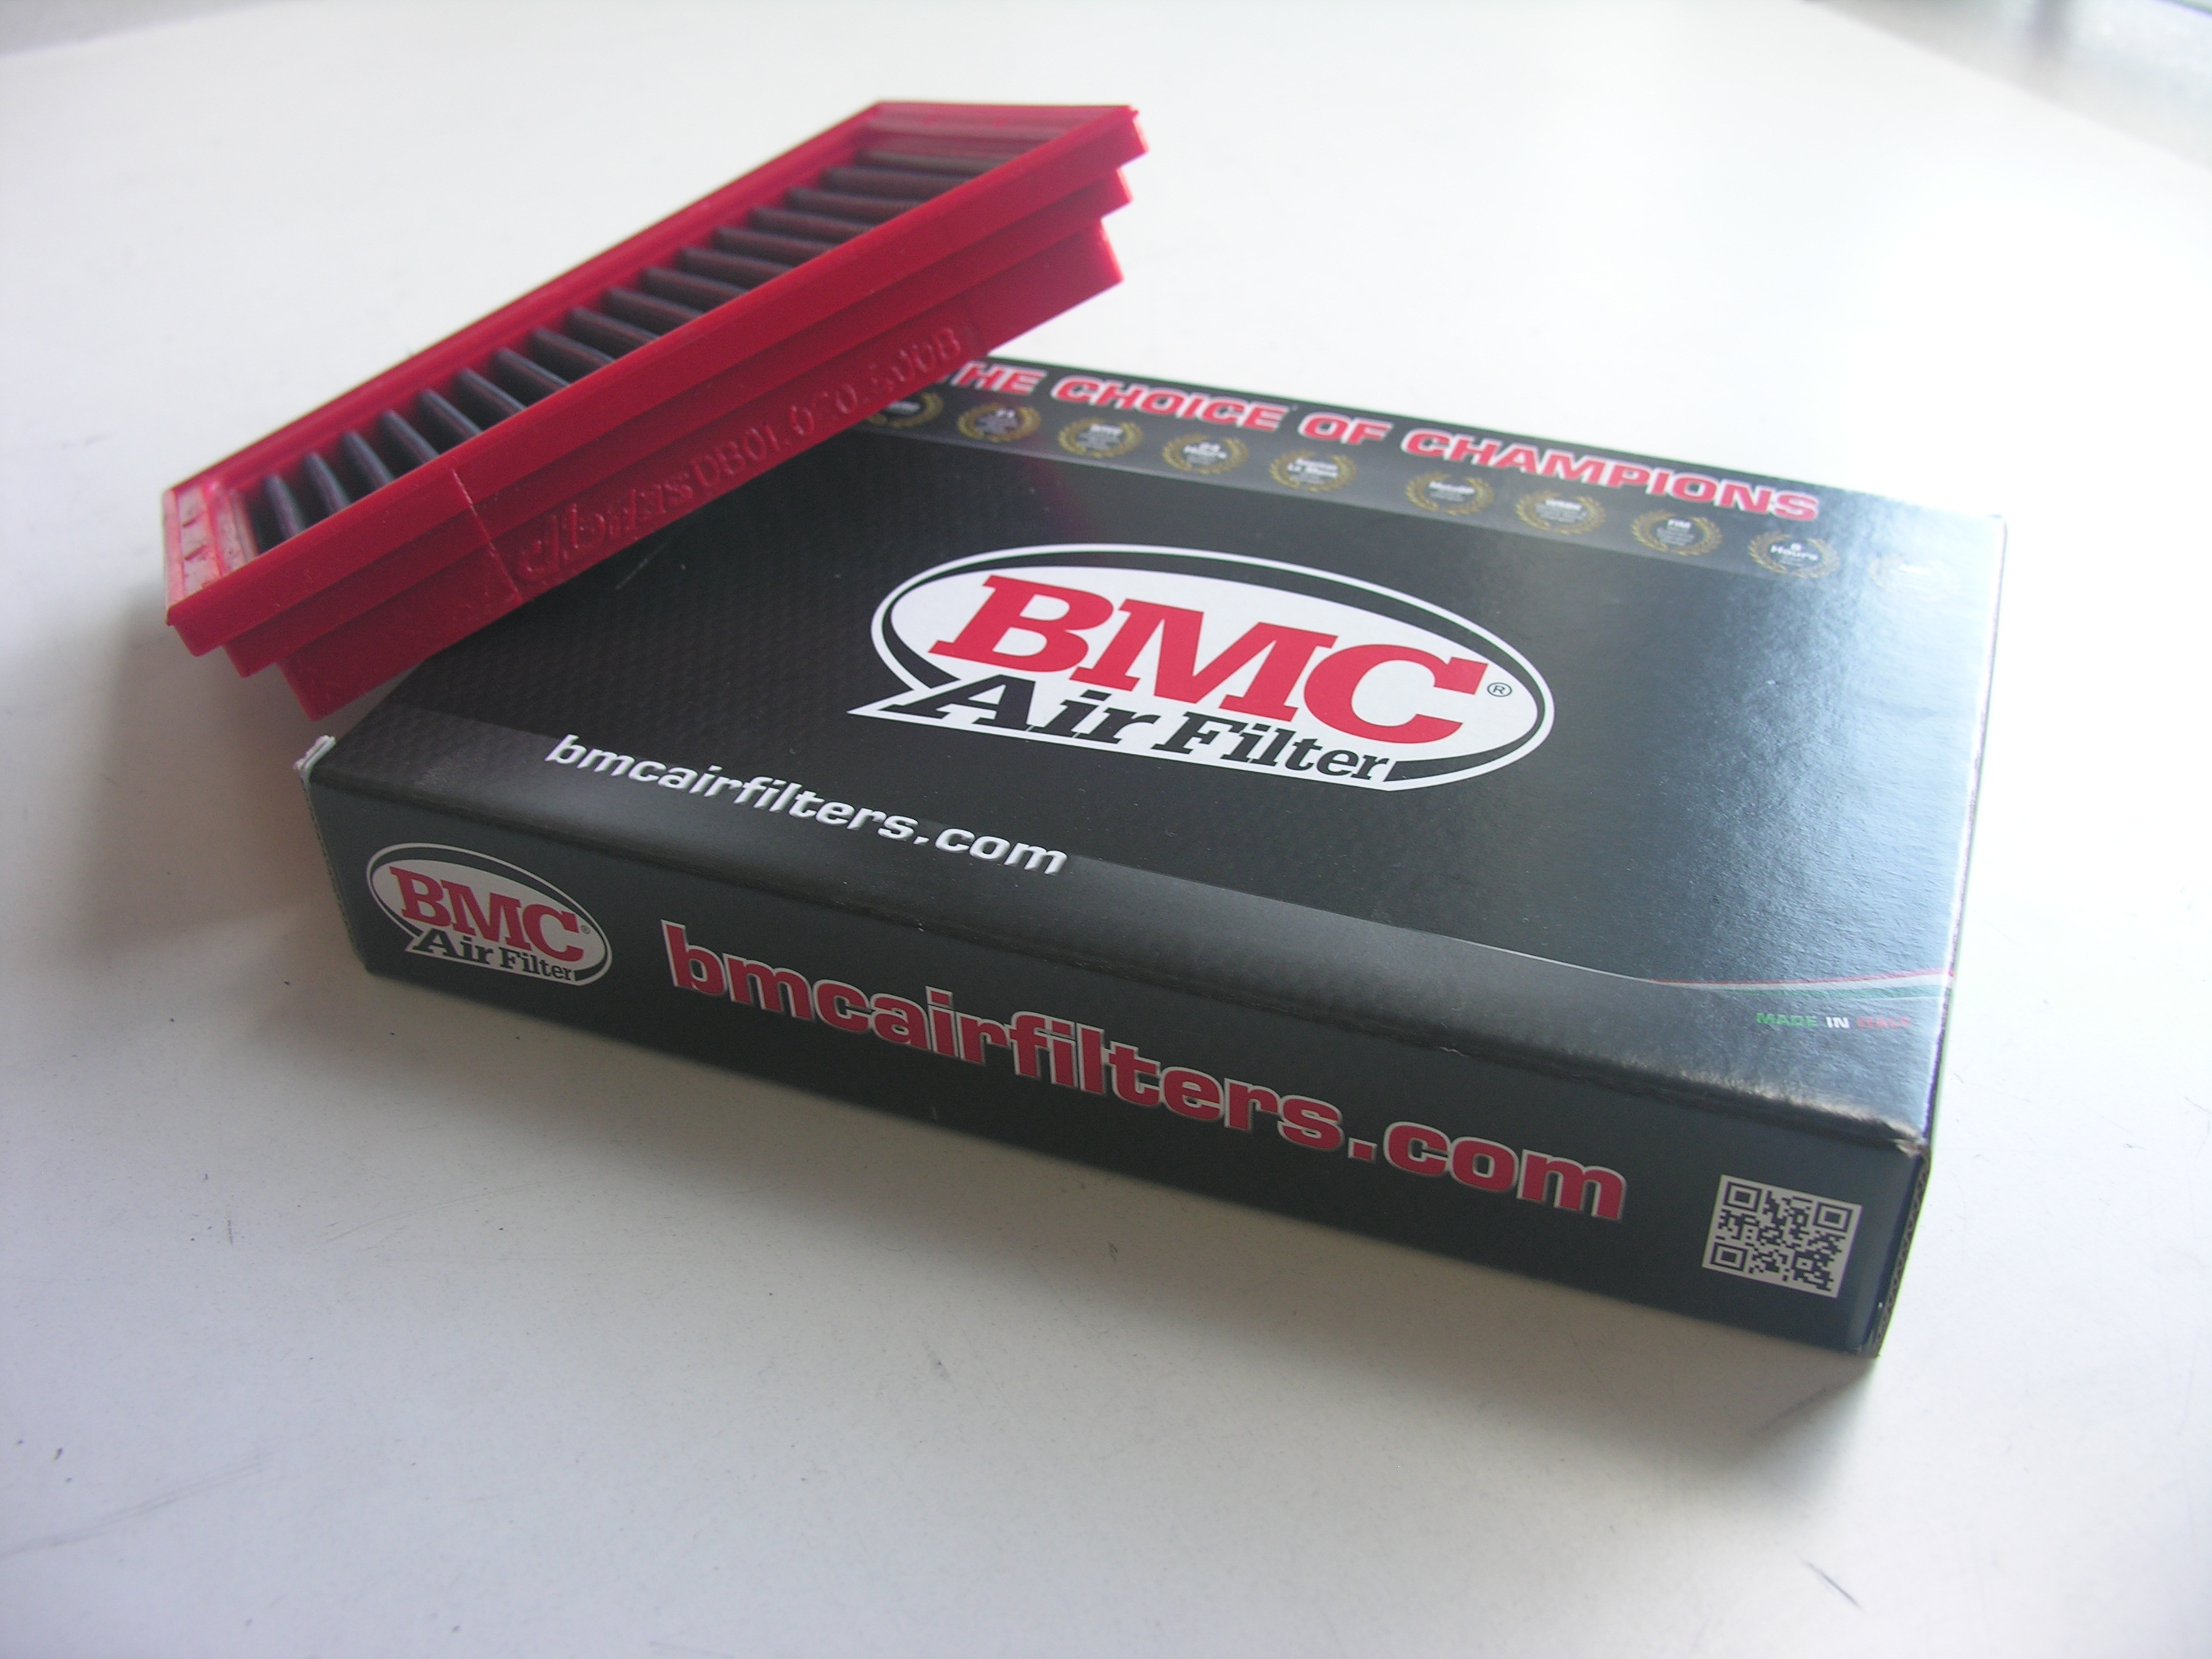 Filter cartrige FlowMaster from BMC